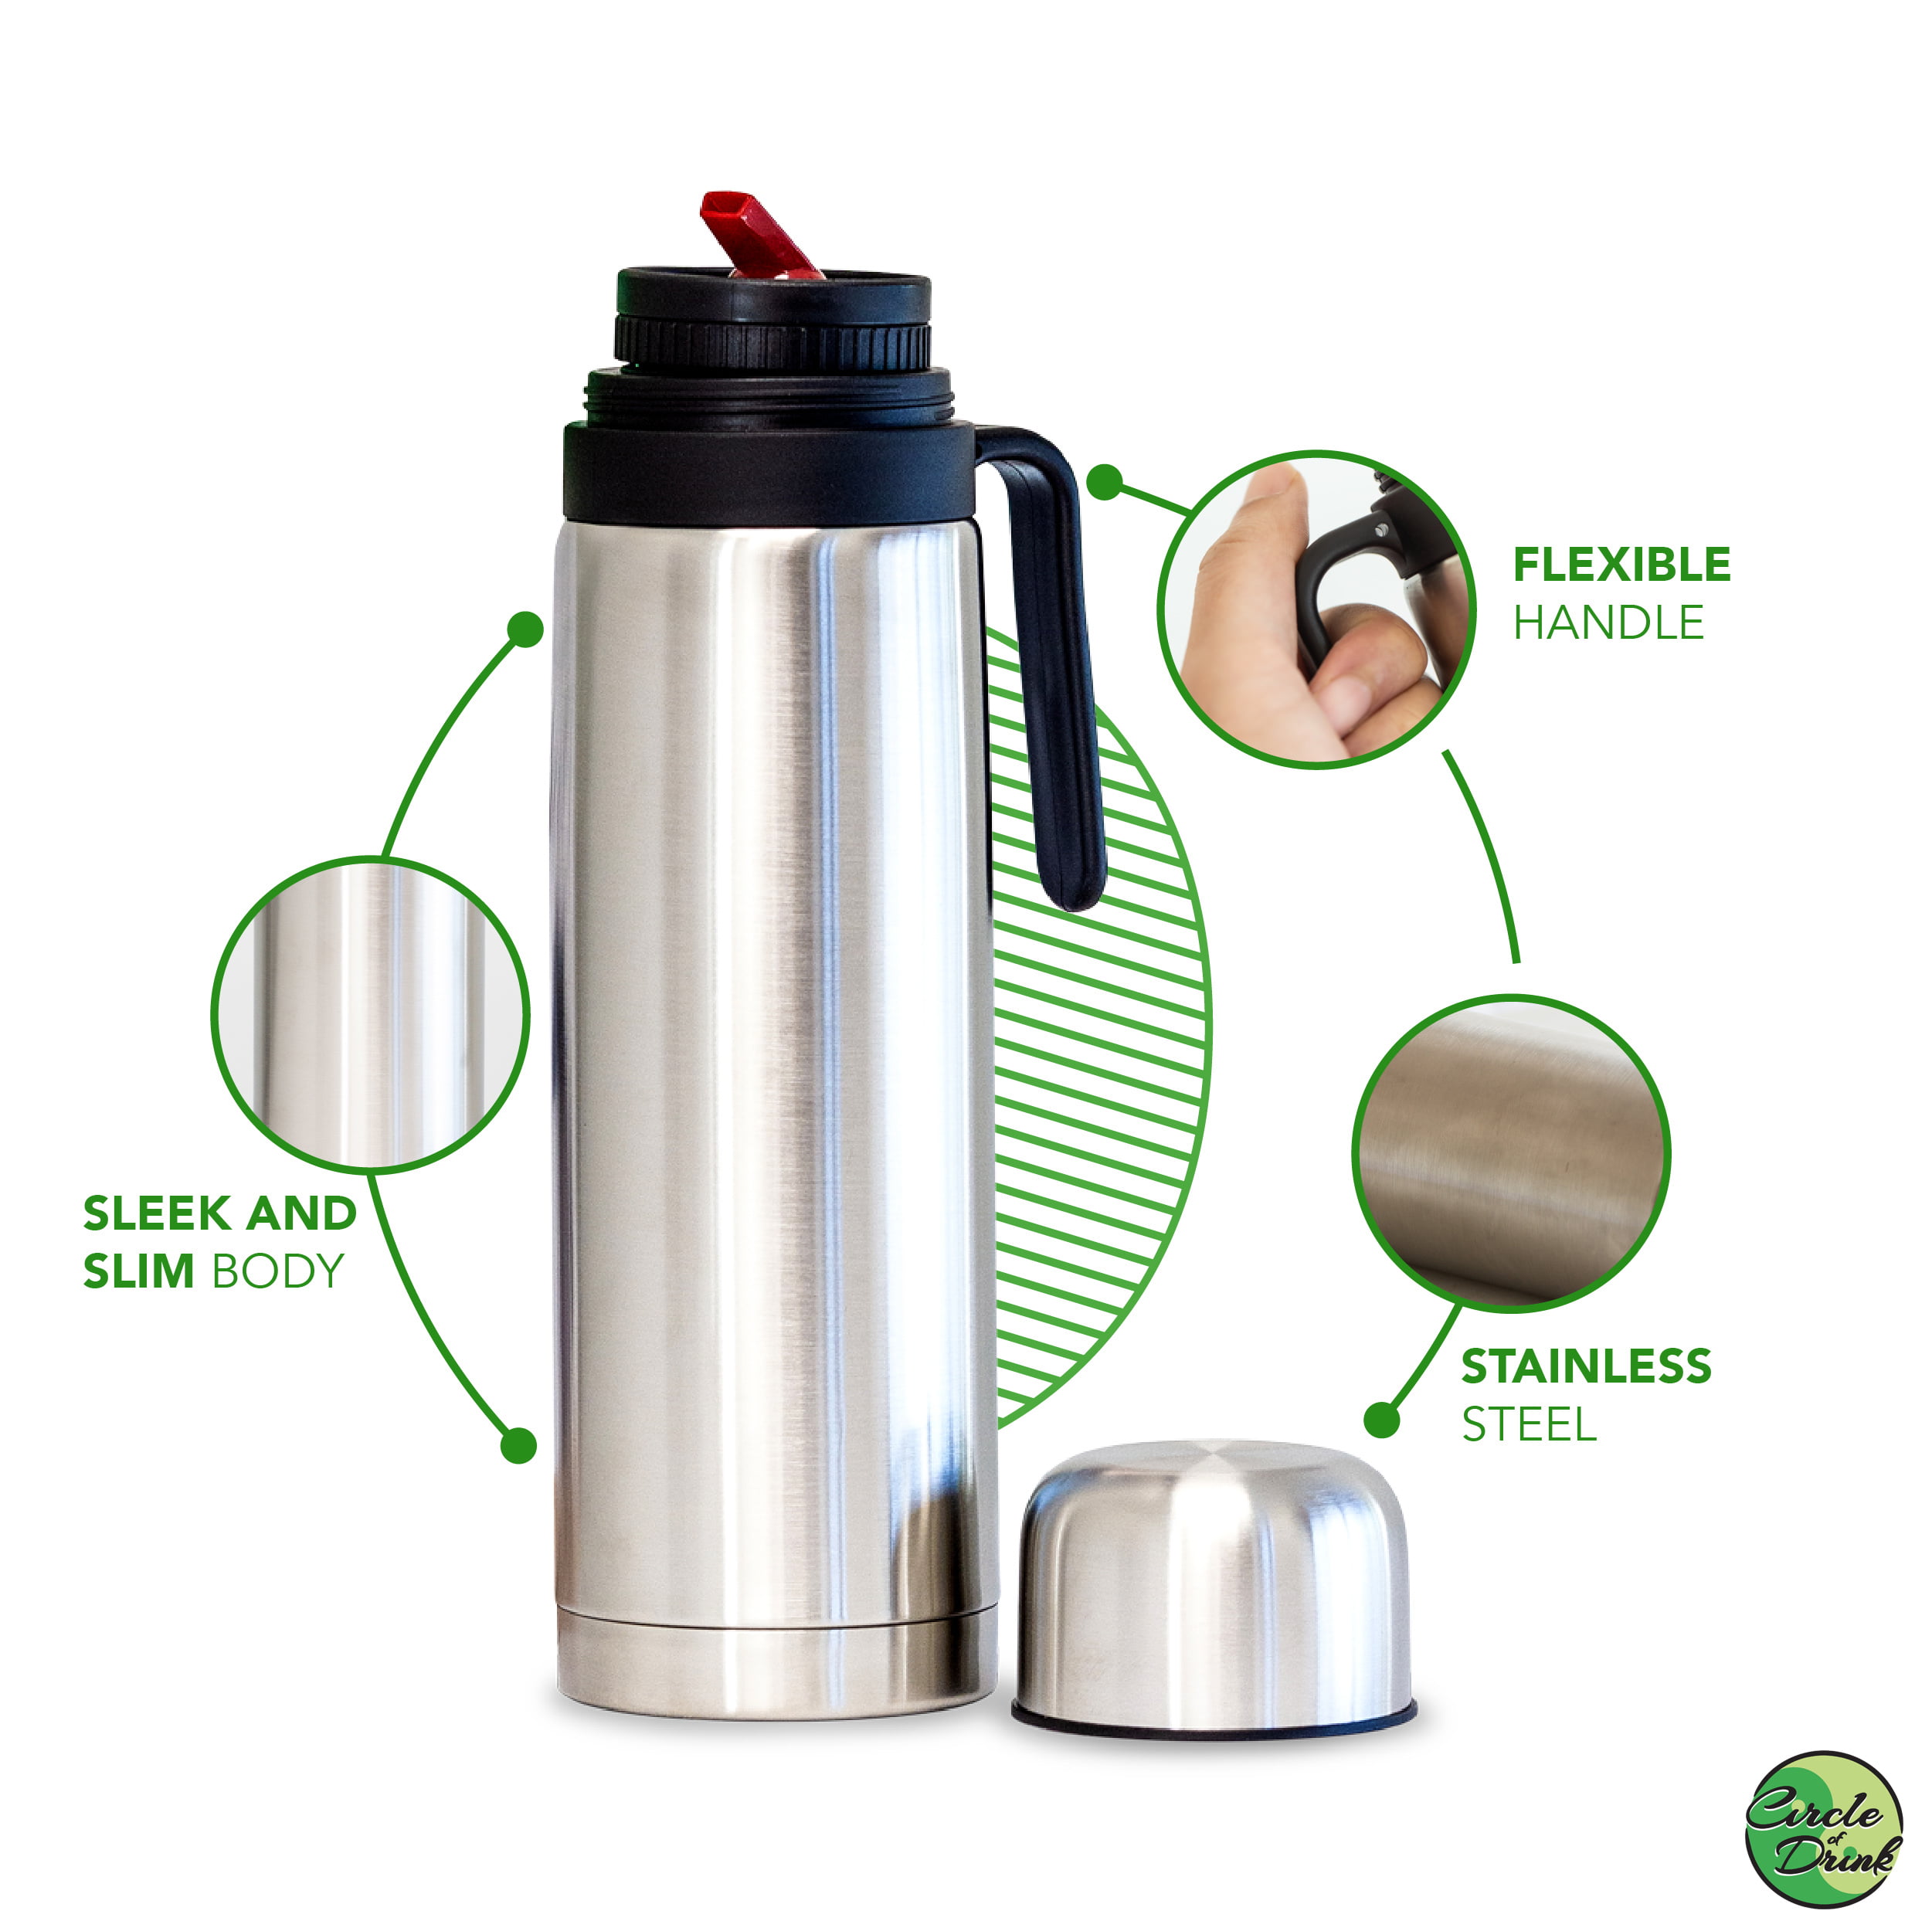 Kalmateh Double Walled Vacuum Insulated Stainless Steel Thermos (760ml) Precise Pouring & Heat Retention- for Yerba Mate, Coffee, Tea, Camping- Matte